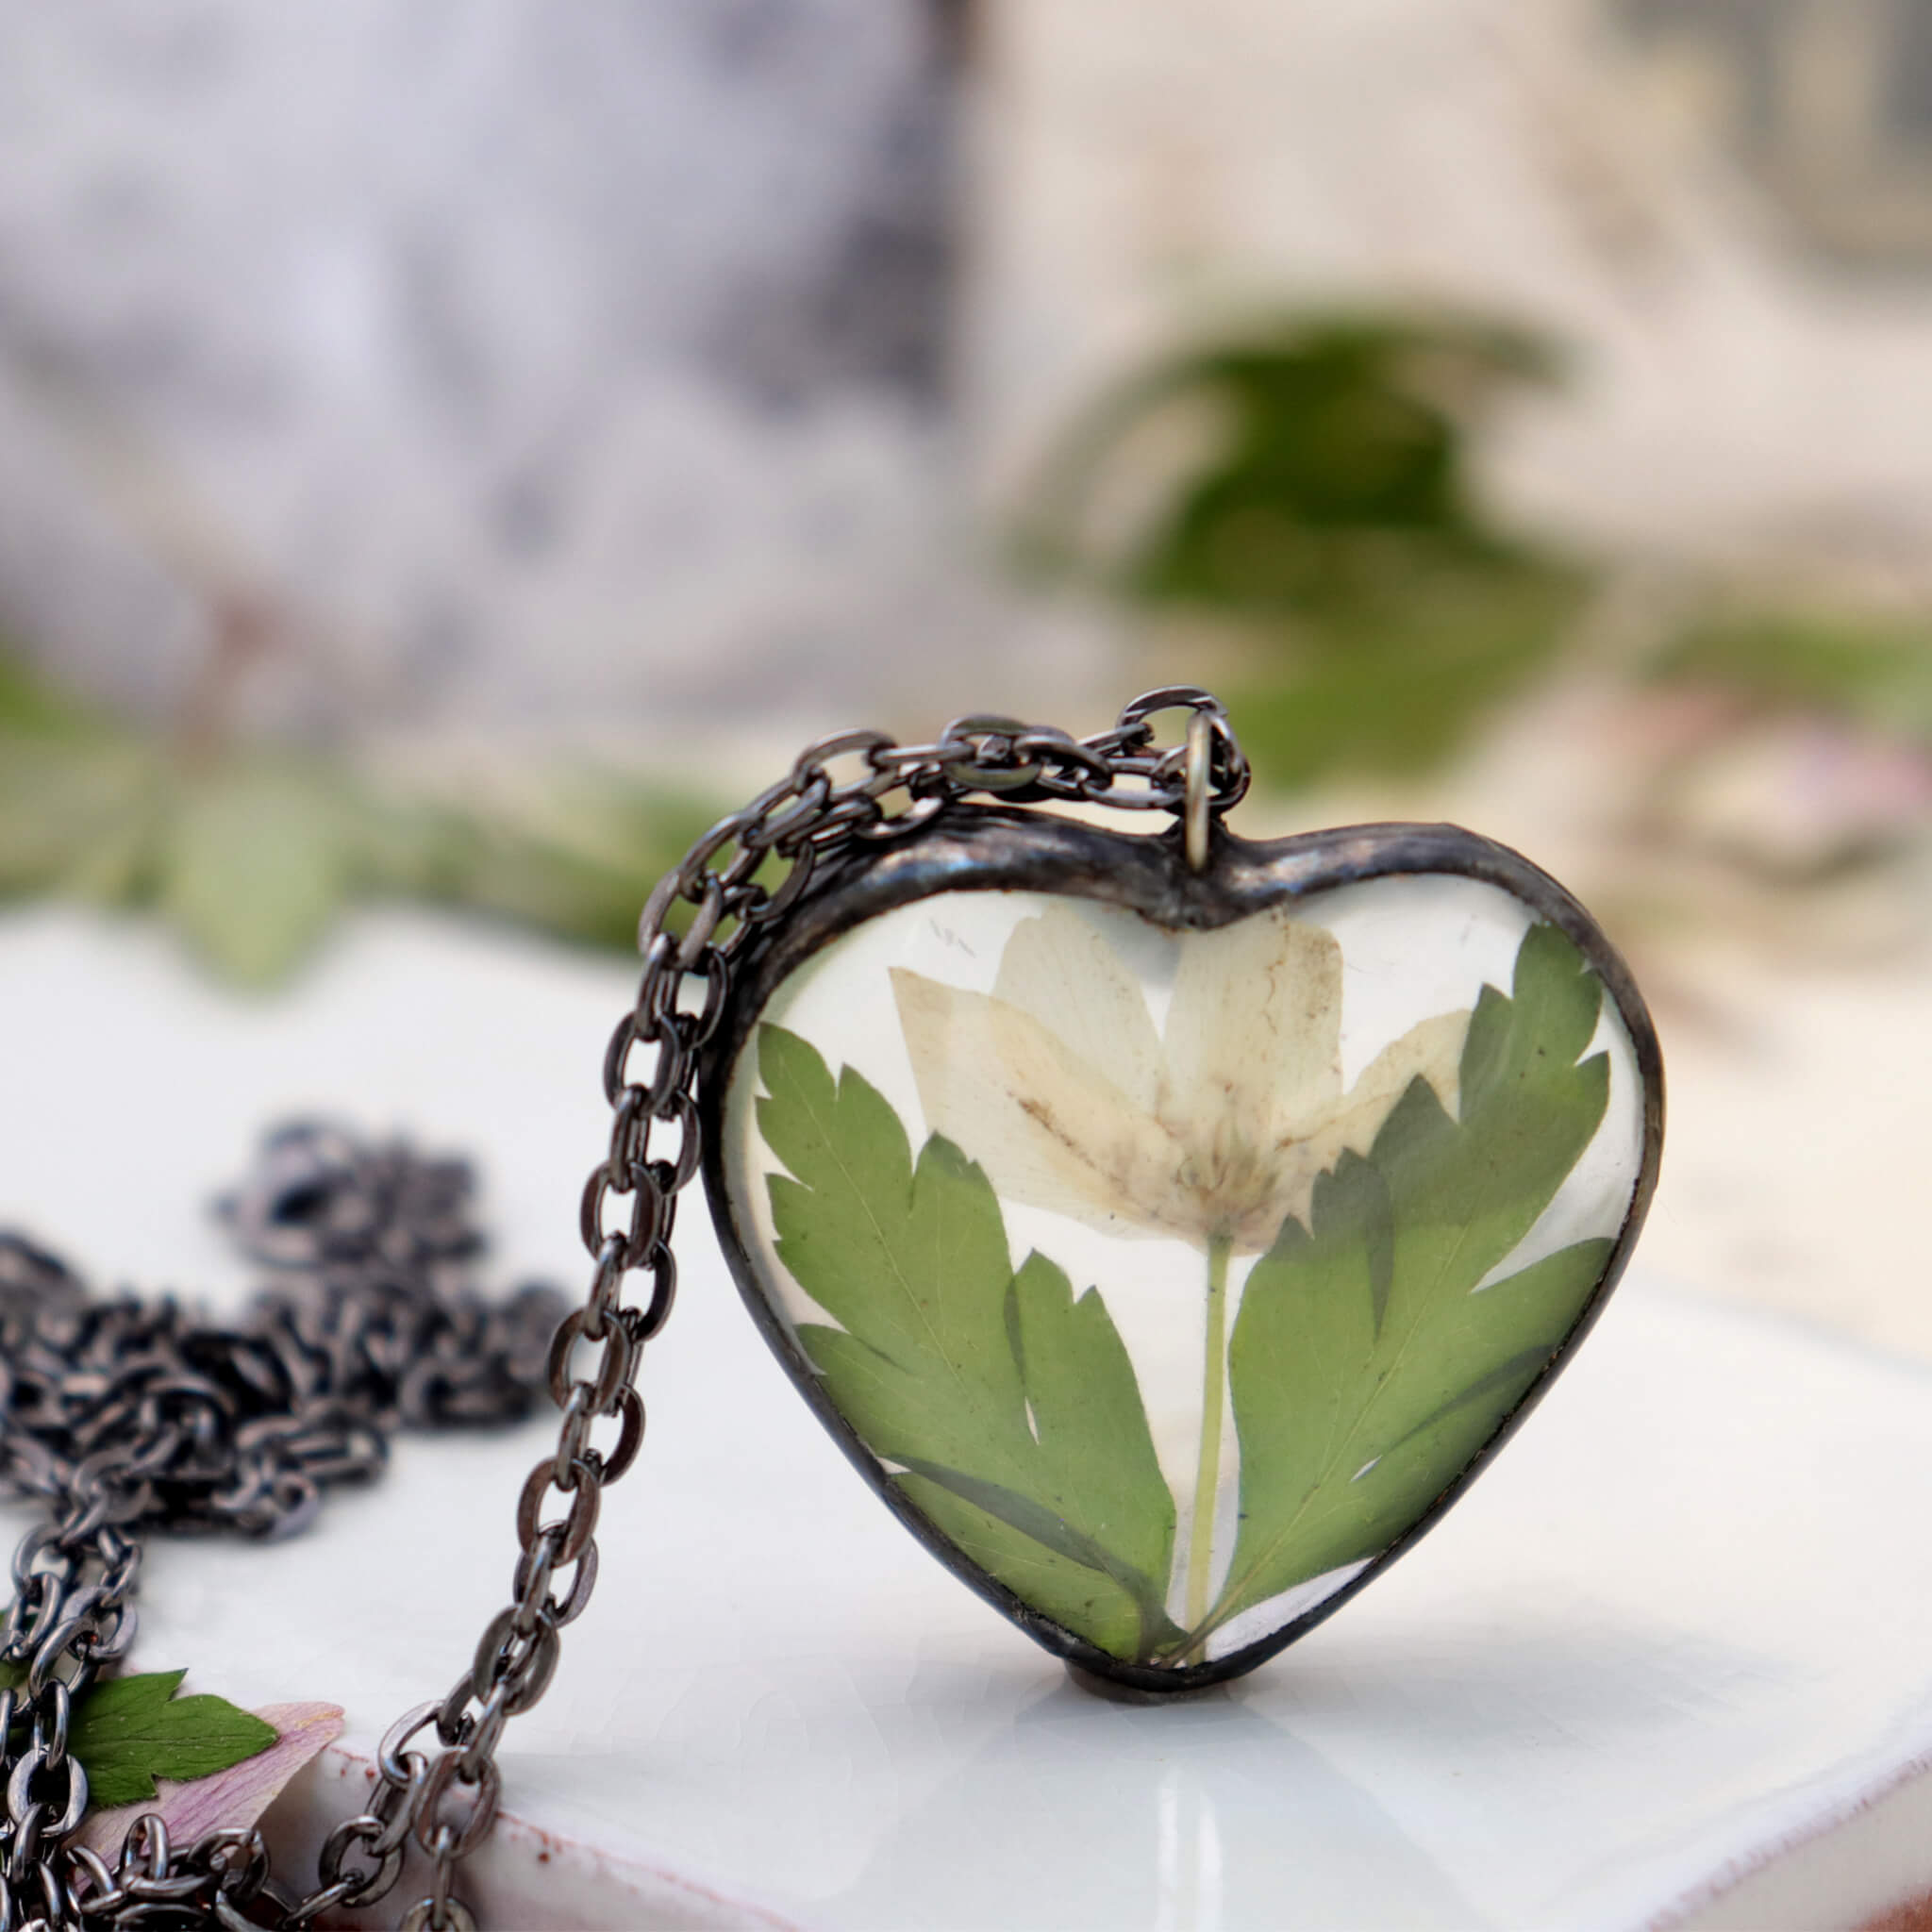 Heart shaped necklace featuring white pressed flowers with green leaves